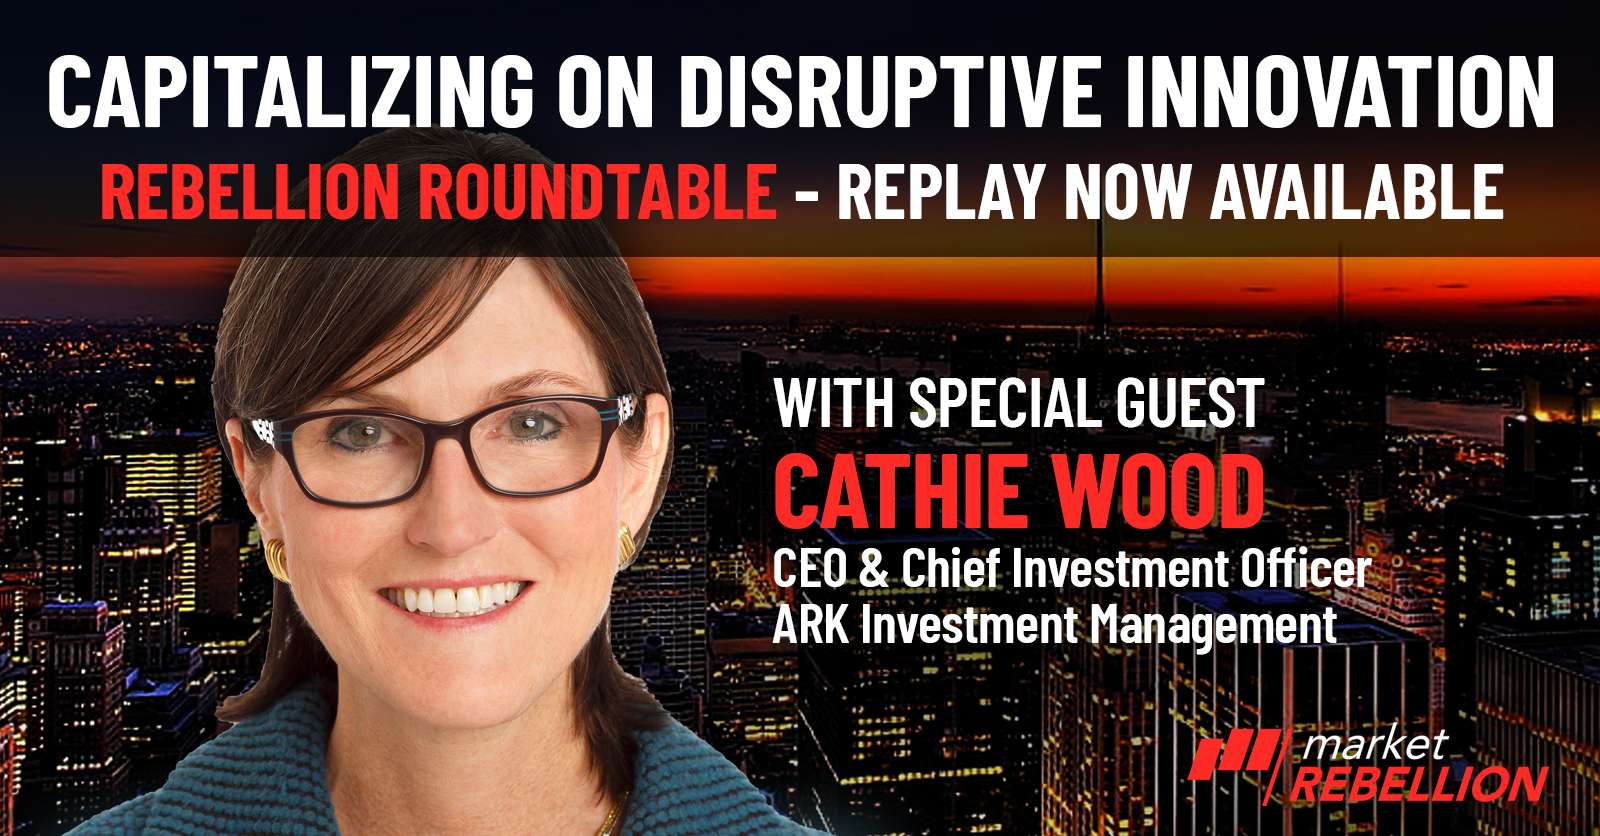 Roundtable Replay: October 12, 2020 with Cathie Wood